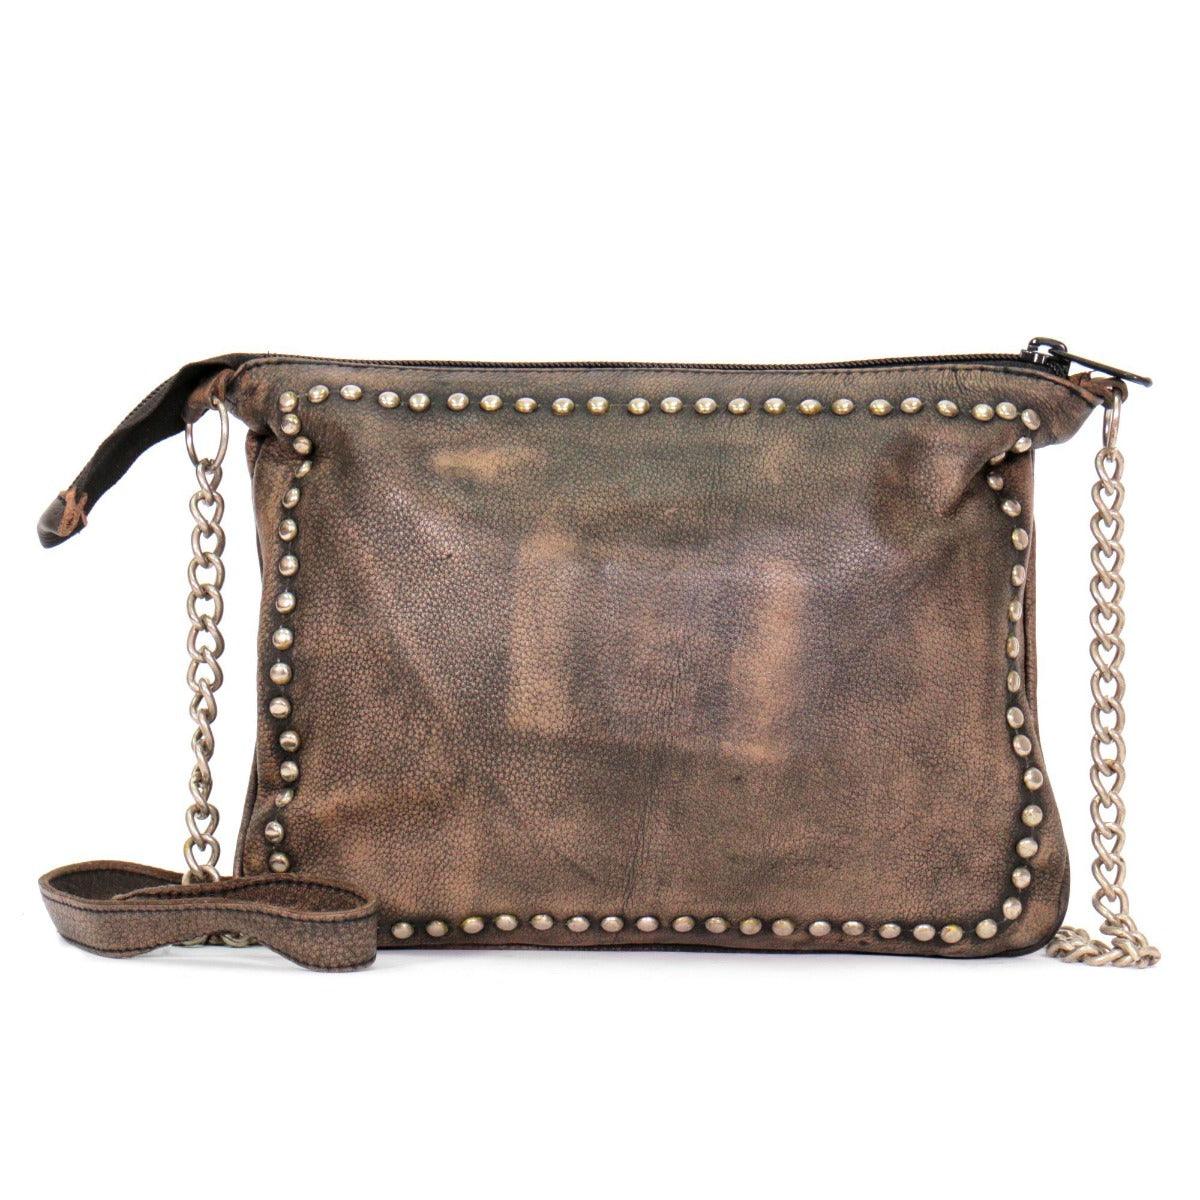 Hot Leathers Concealed Carry Purse - American Legend Rider